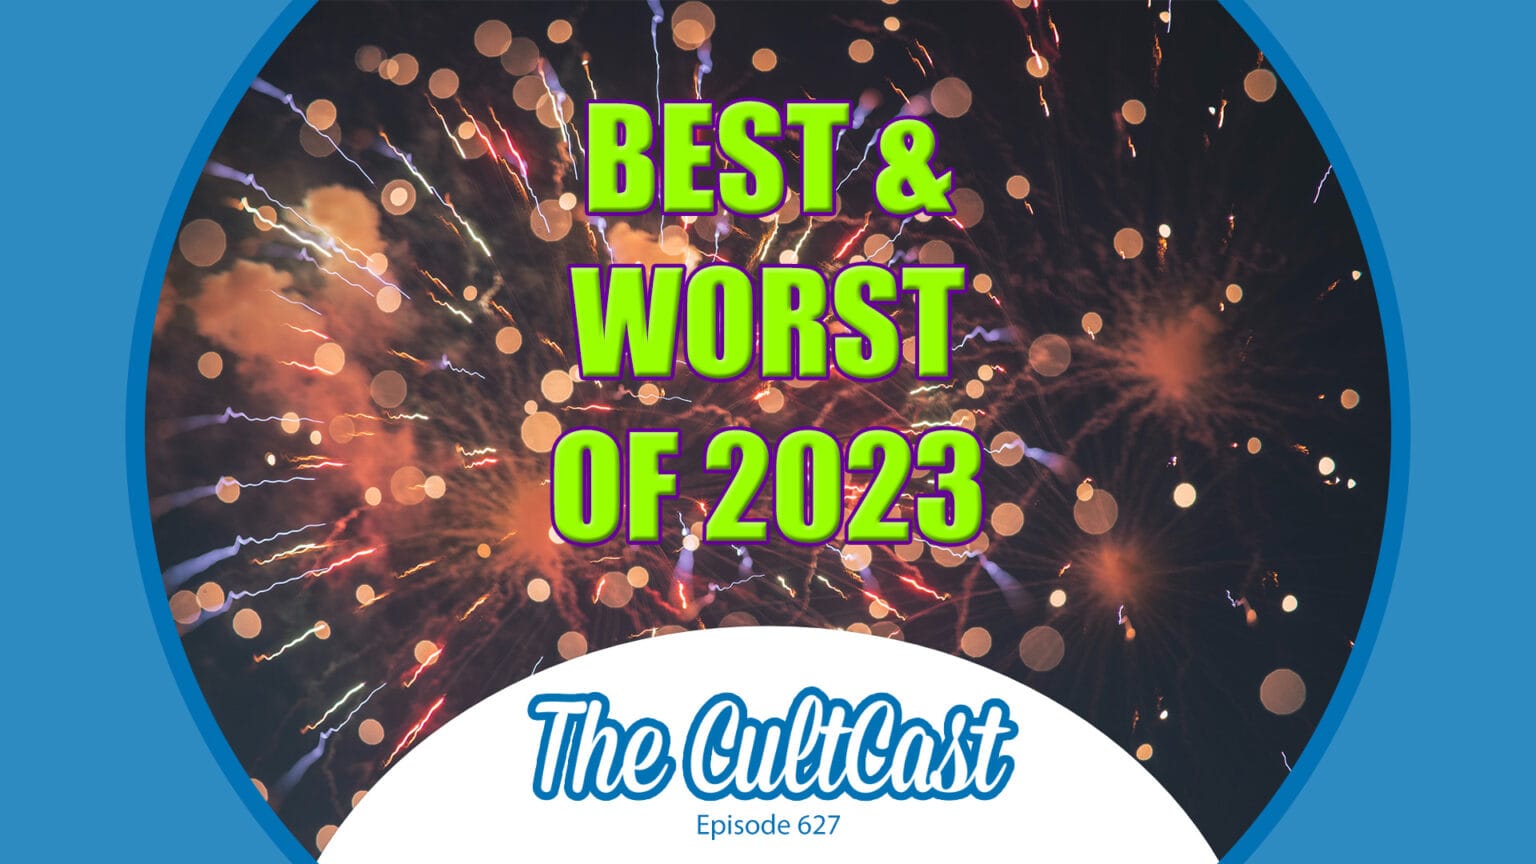 Best and worst of 2023: The CultCast episode 627 year-end wrap.